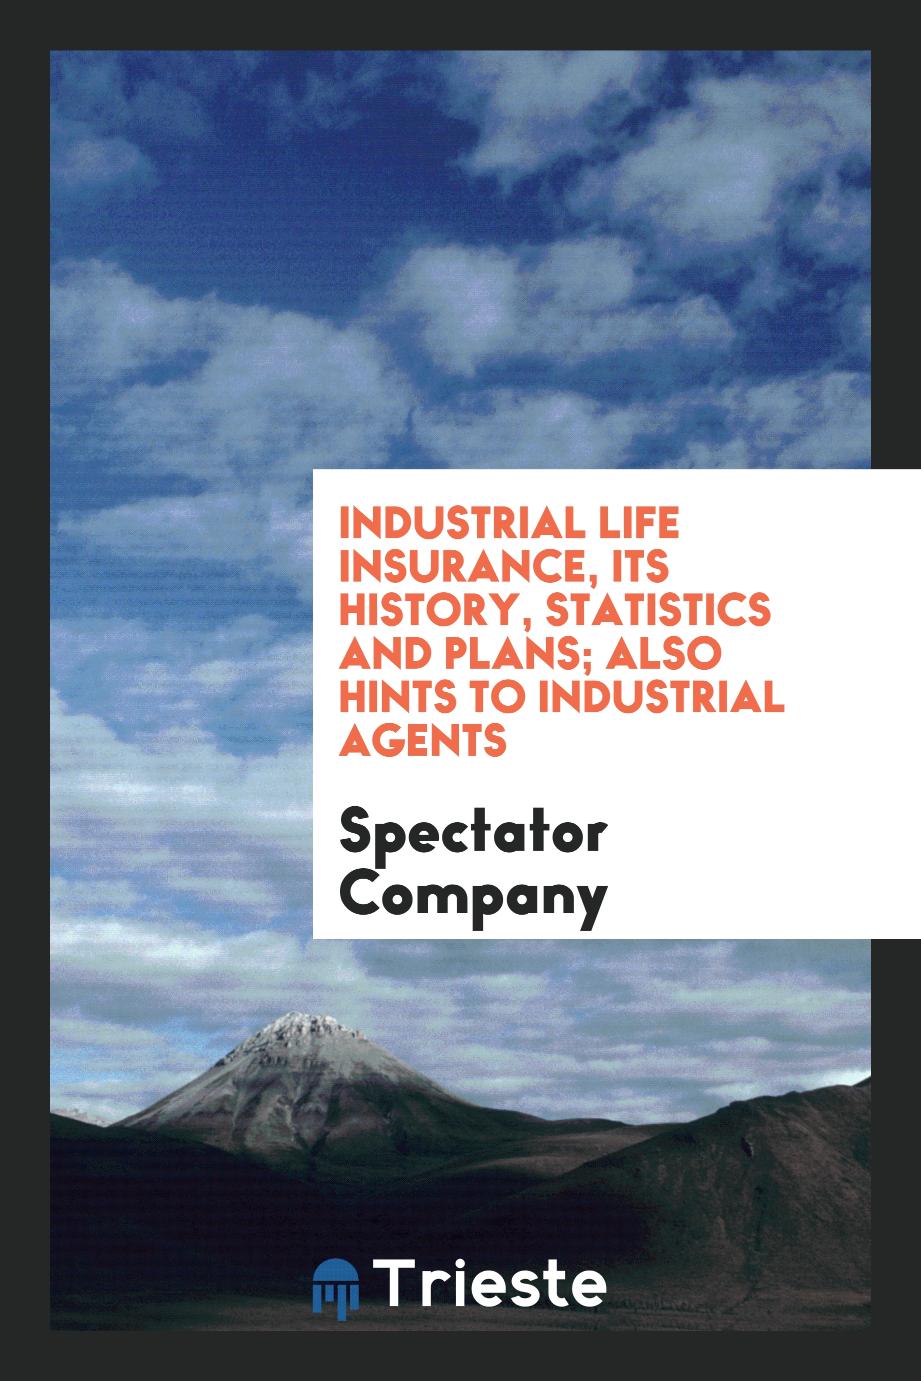 Industrial life Insurance, Its History, Statistics and Plans; Also Hints to Industrial Agents